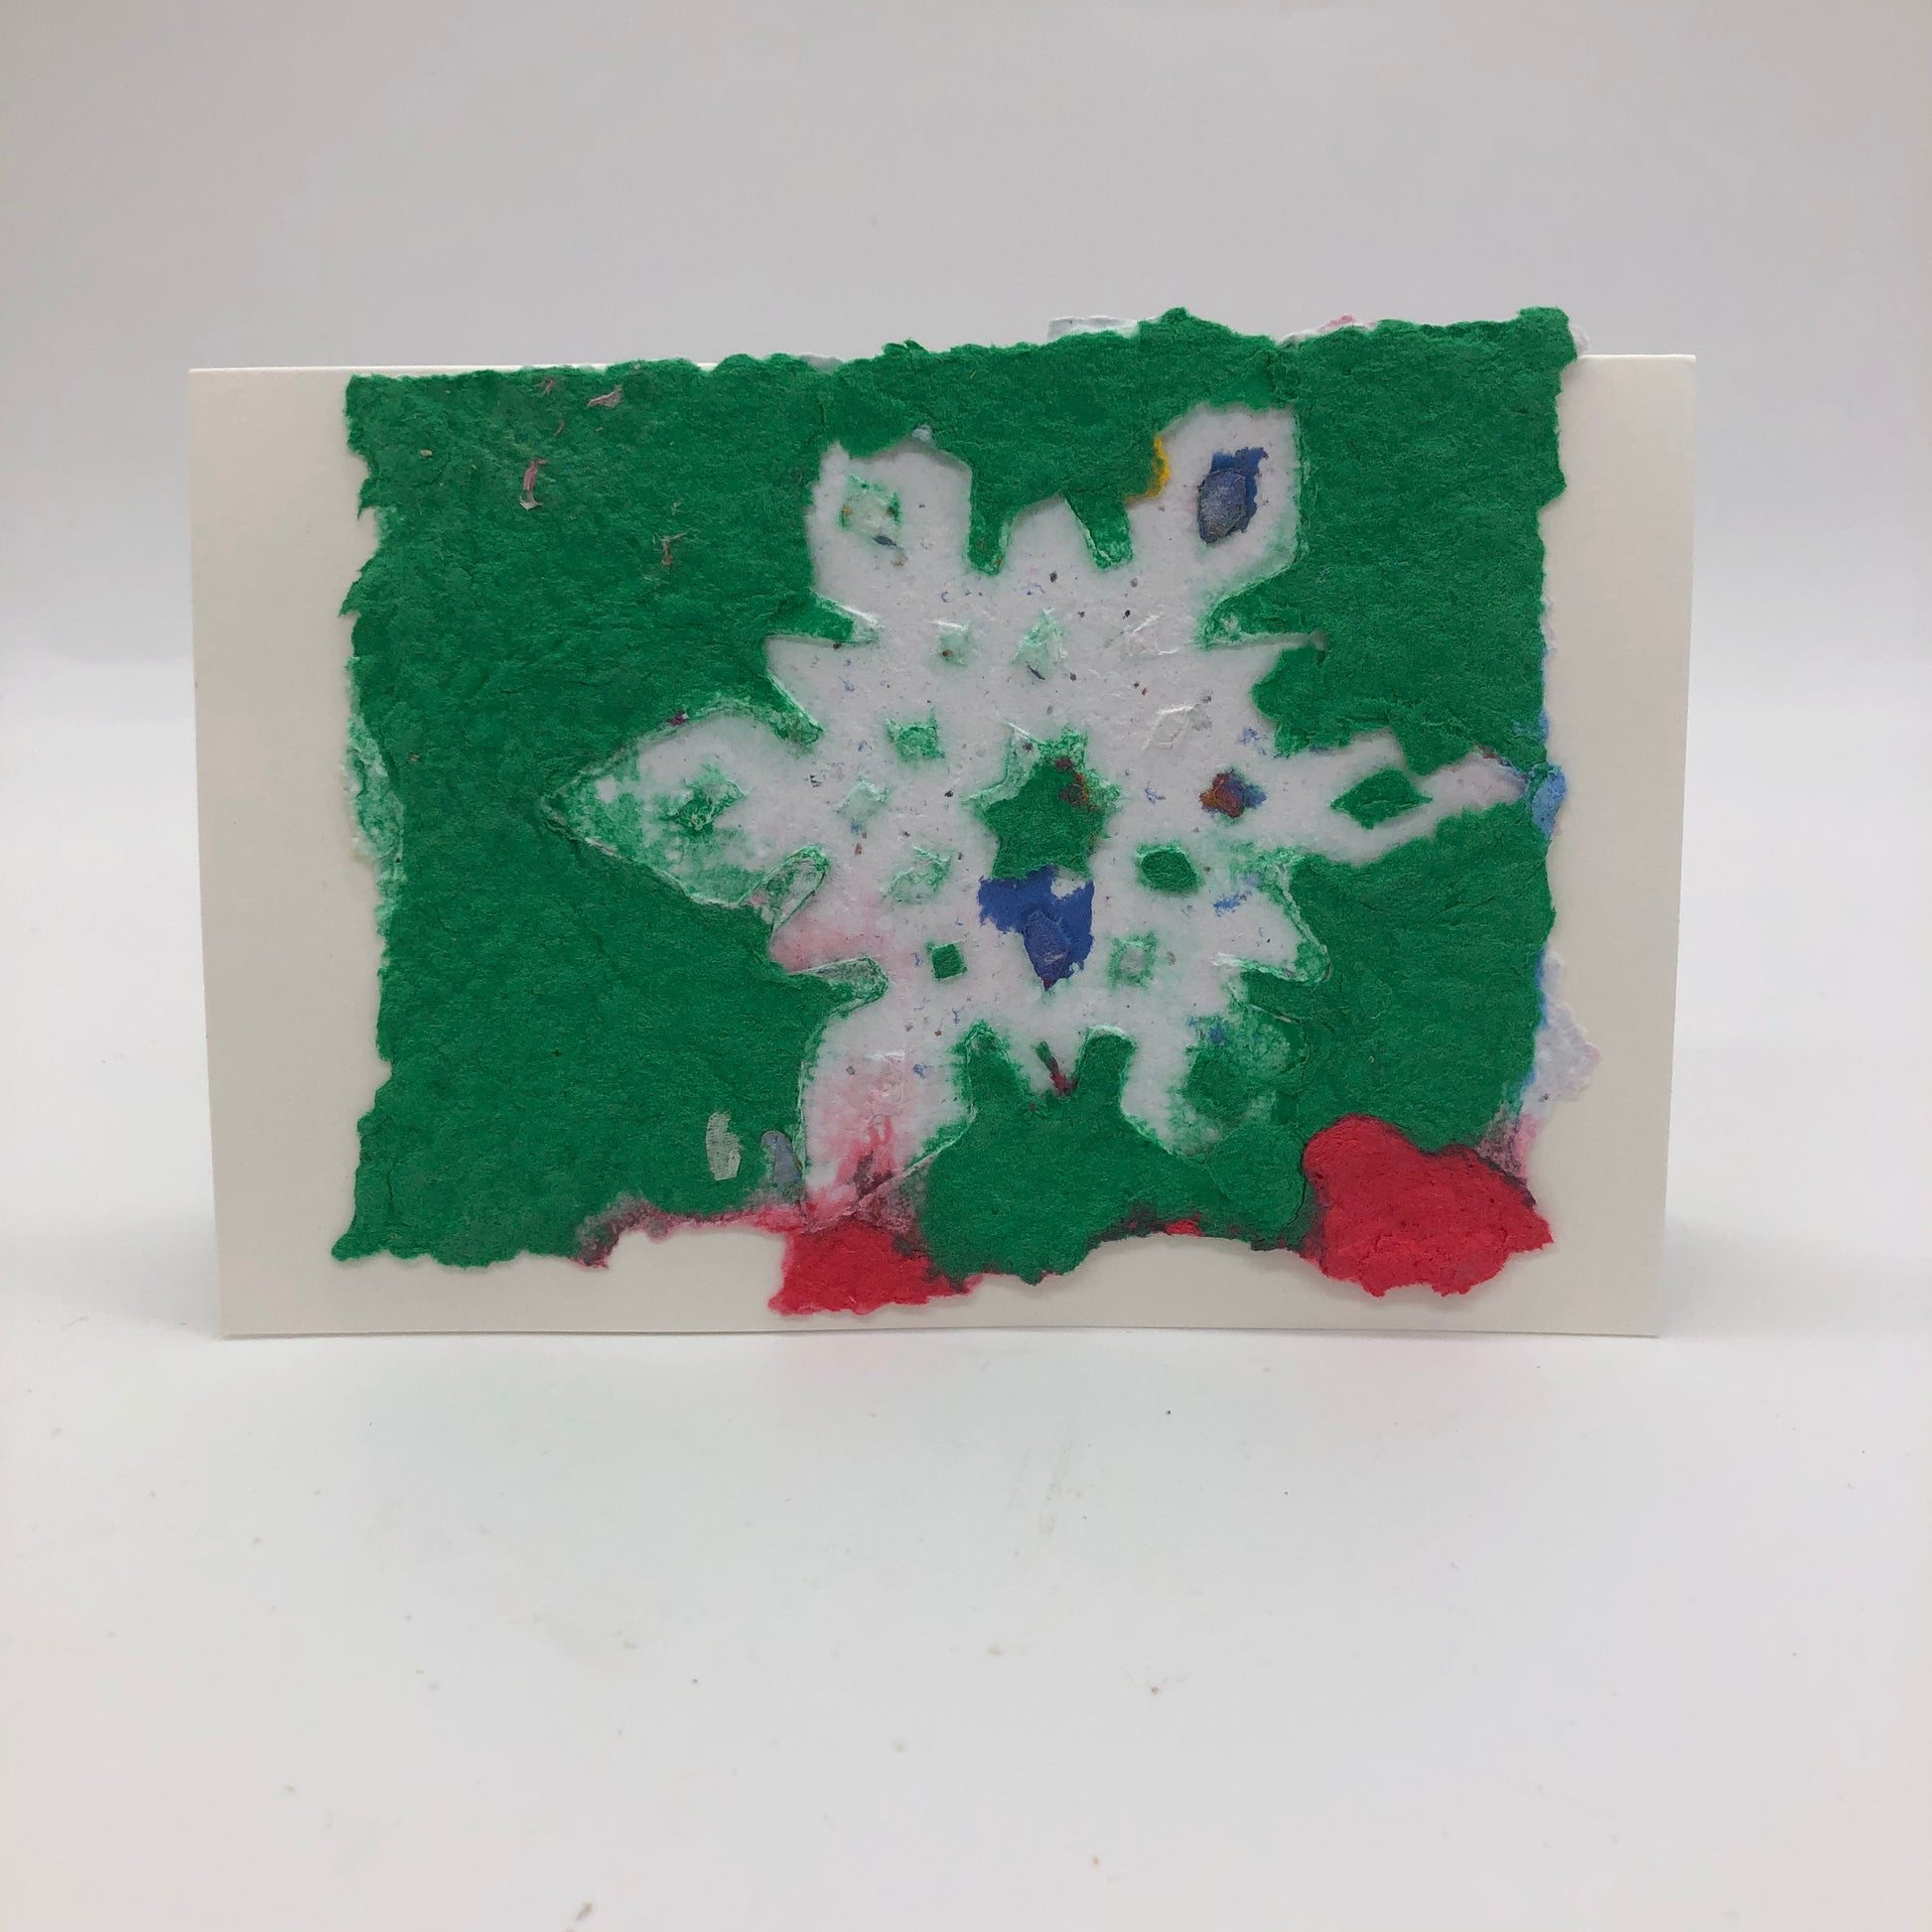 Handmade paper greeting card with green background with one large white snowflake and 2 blobs of red.